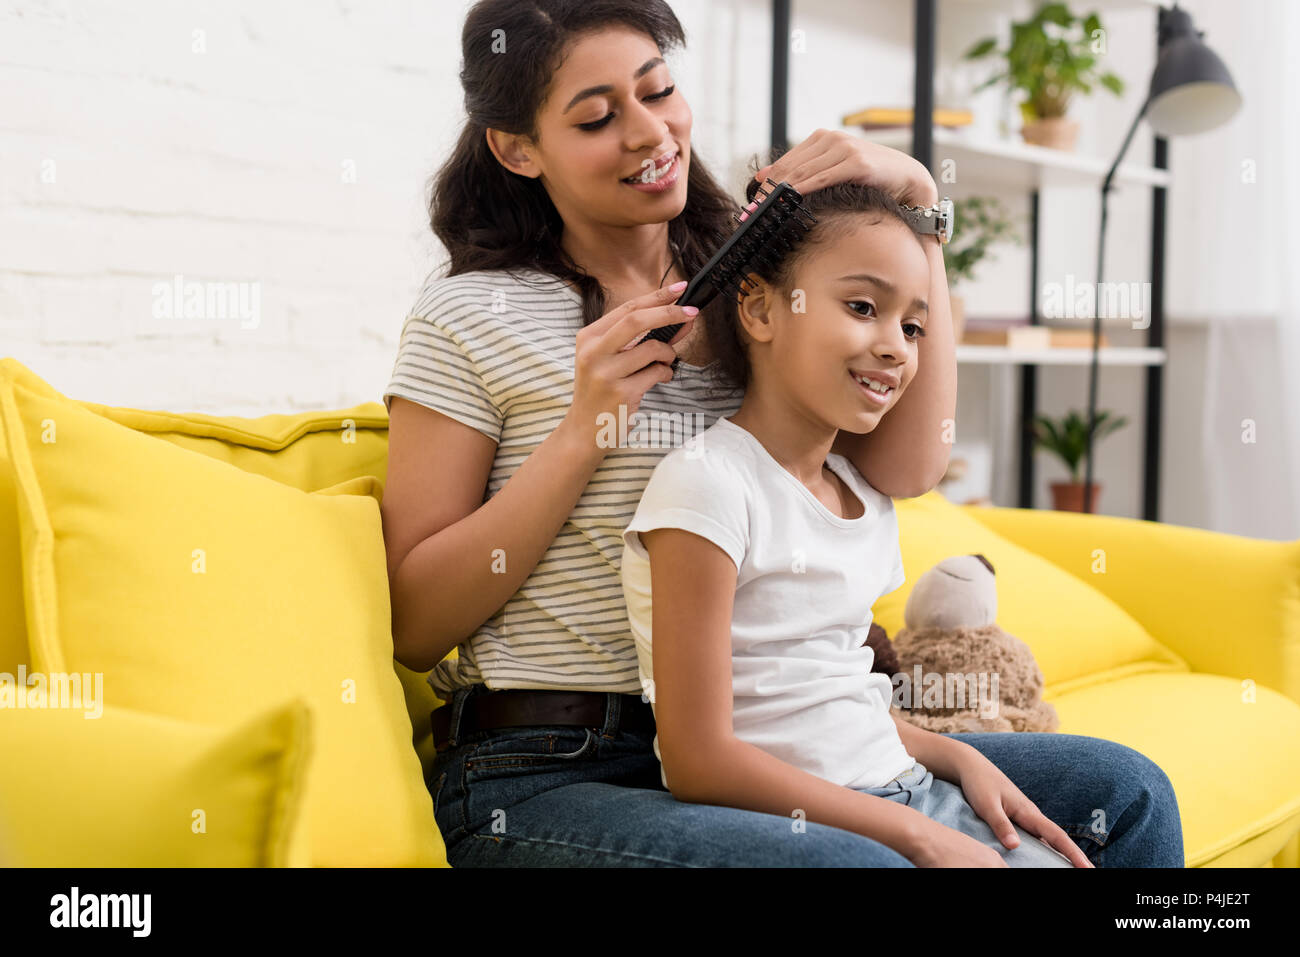 mother combing beautiful daughters hair on couch at home Stock Photo